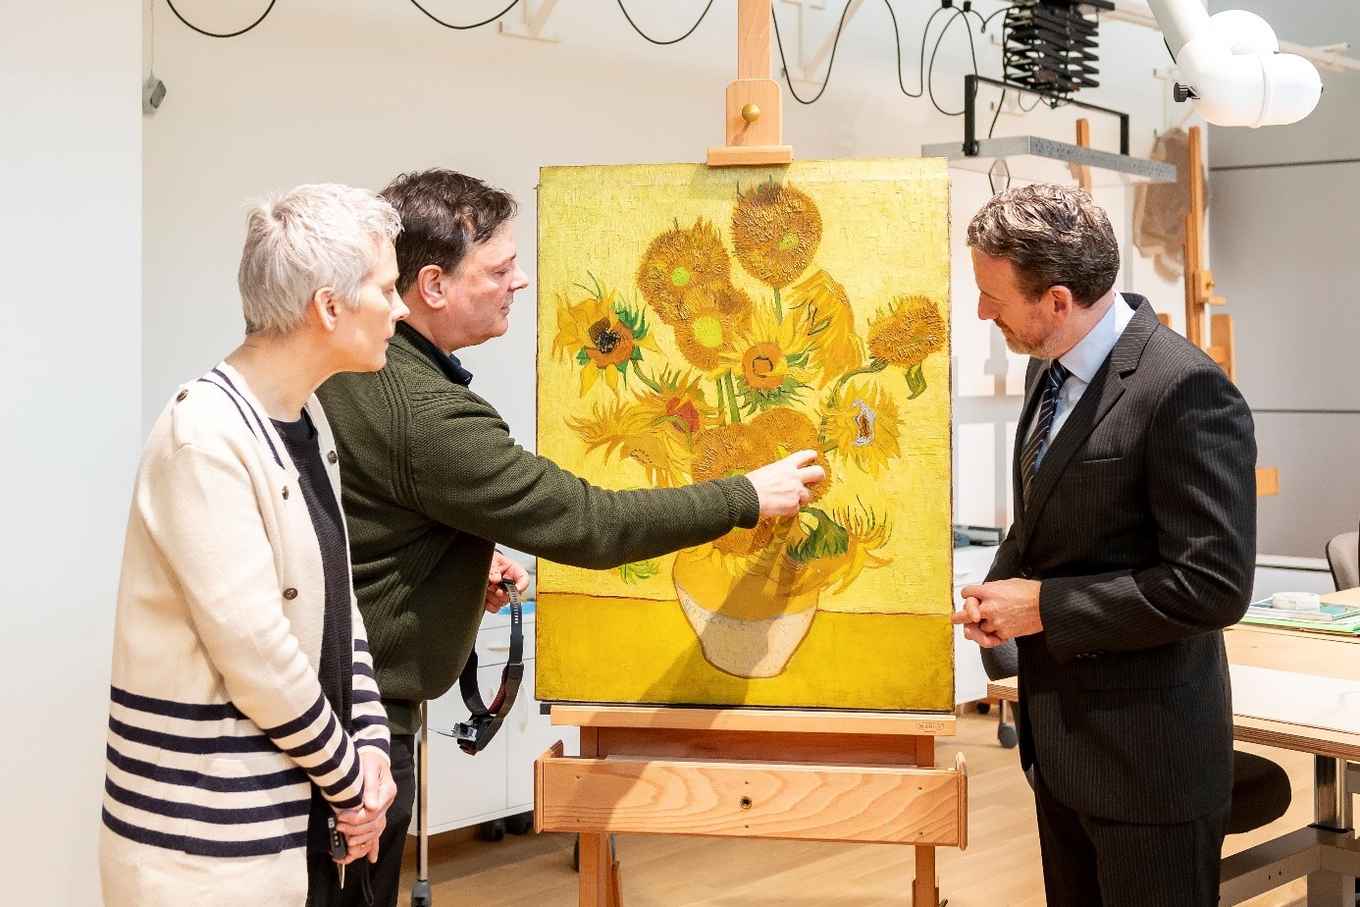 Axel Rüger, Director of the Van Gogh Museum, announces in the museum’s conservation studio together with restorers Ella Hendriks and René Boitelle that Sunflowers will no longer travel due to its fragile condition (photo: Van Gogh Museum)